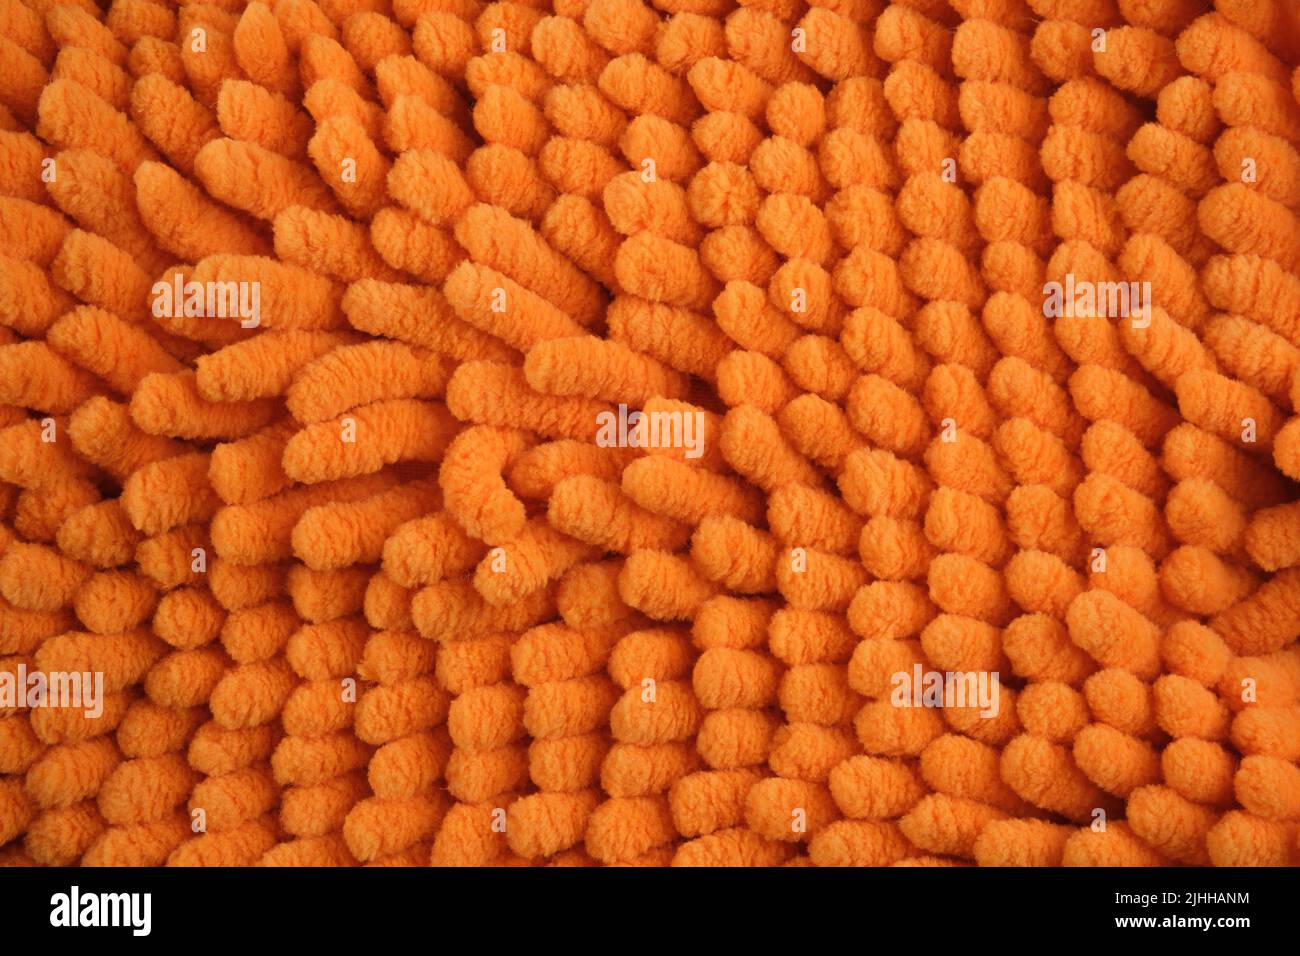 Microfibre cloth close up image. Soft and fluffy. Stock Photo